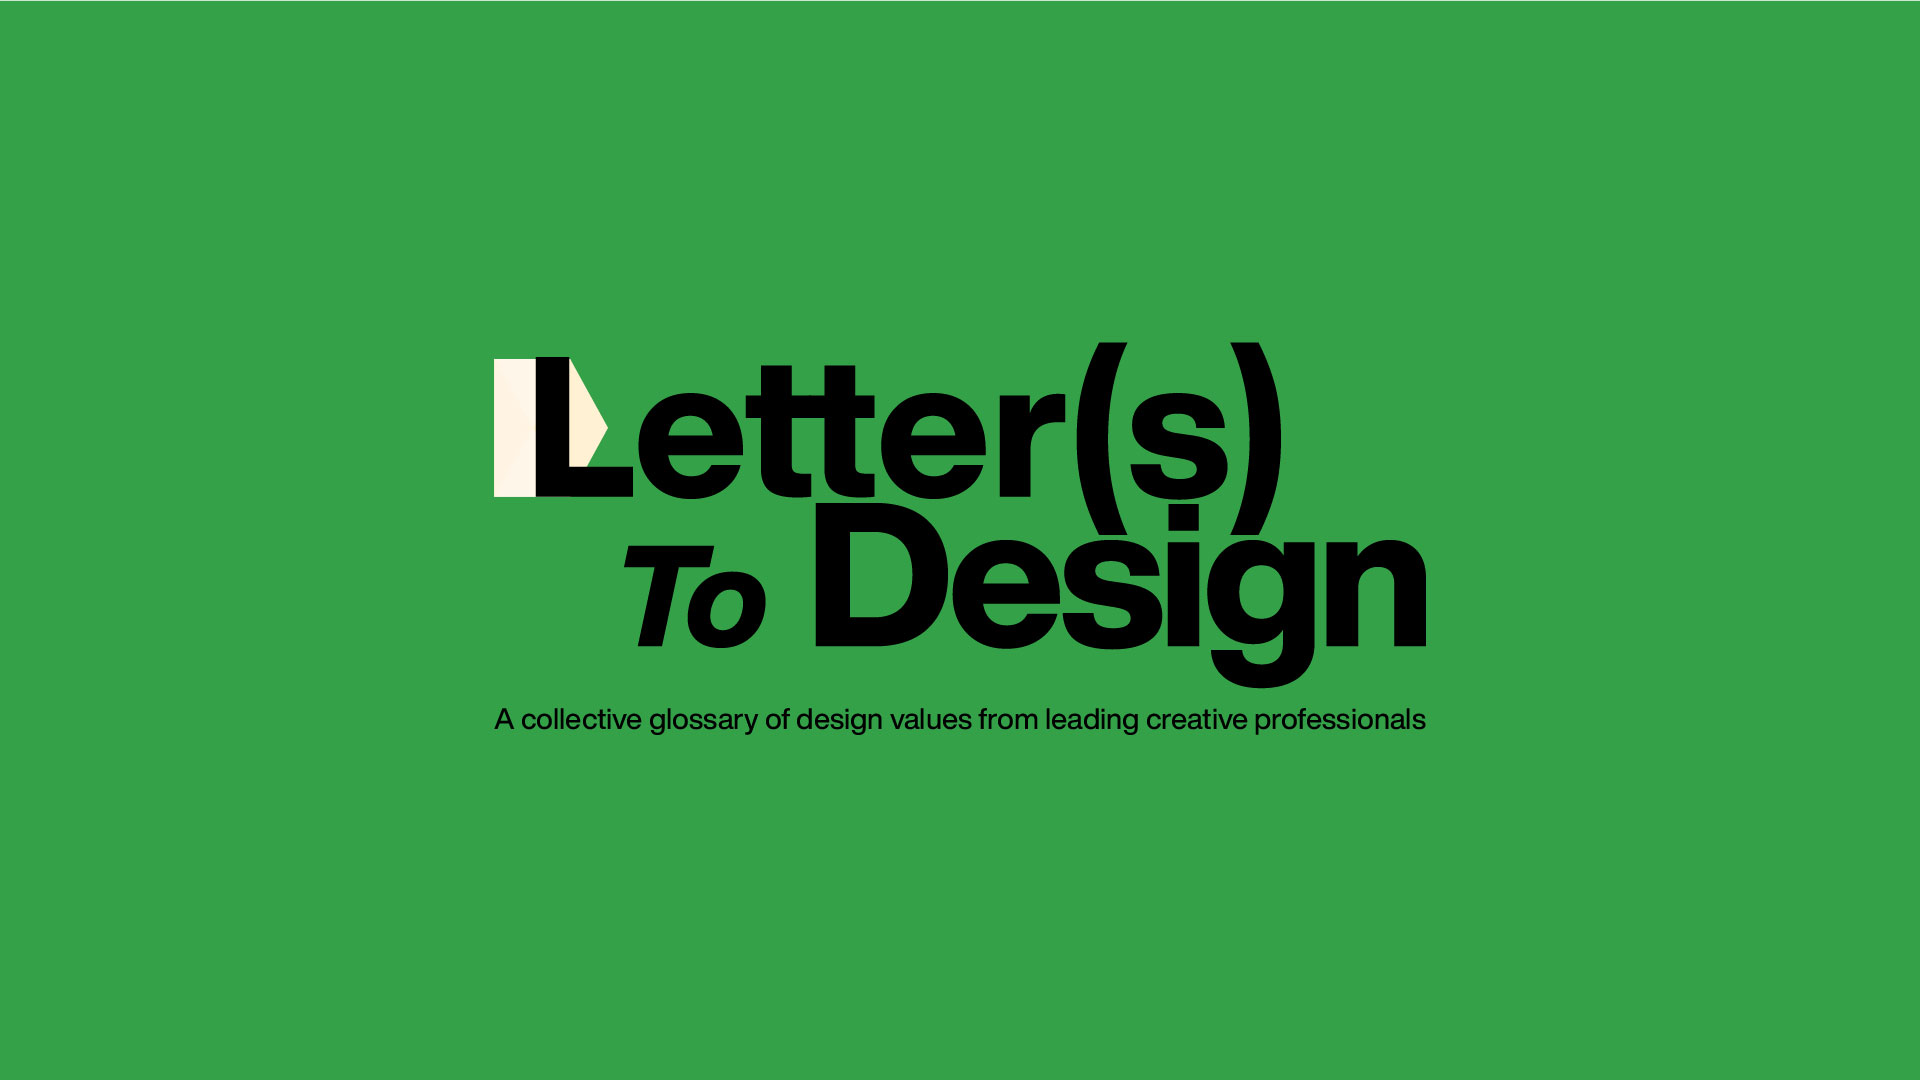 Letter(s) To Design